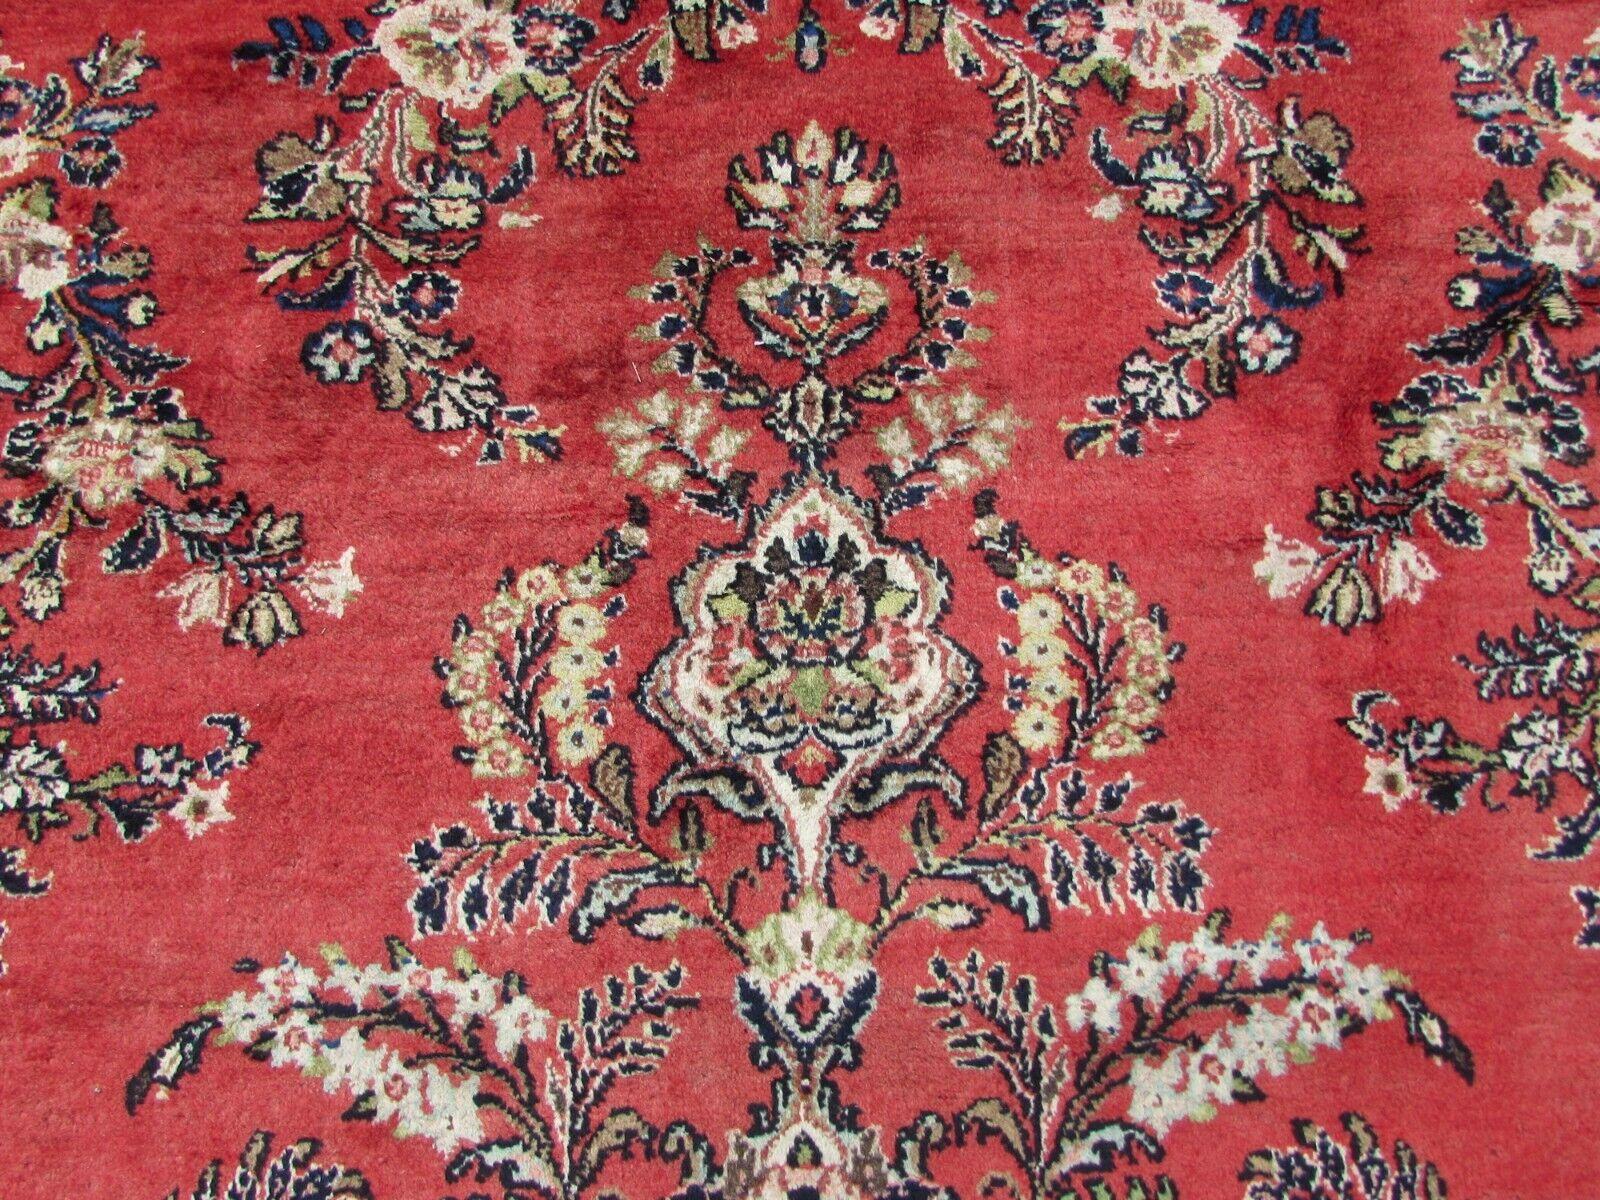 Handmade Vintage Persian Style Sarouk Oversize Rug 10.7' x 16.4', 1970s - 1Q72 For Sale 1